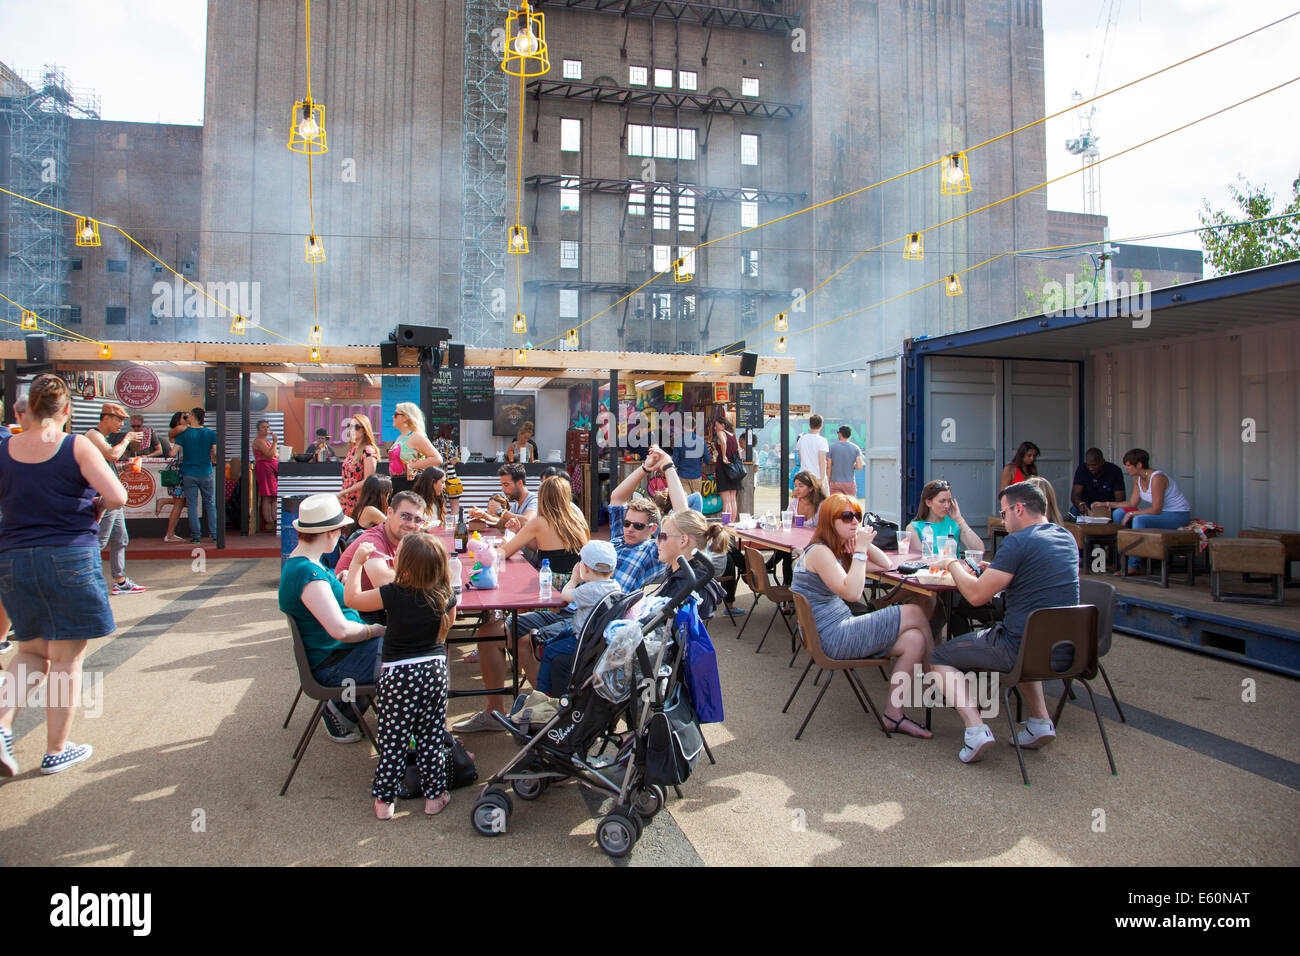 London, England - 9 August 2014 The Power of Sumner and Street Feast Festival at the Battersea Power Station Stock Photo